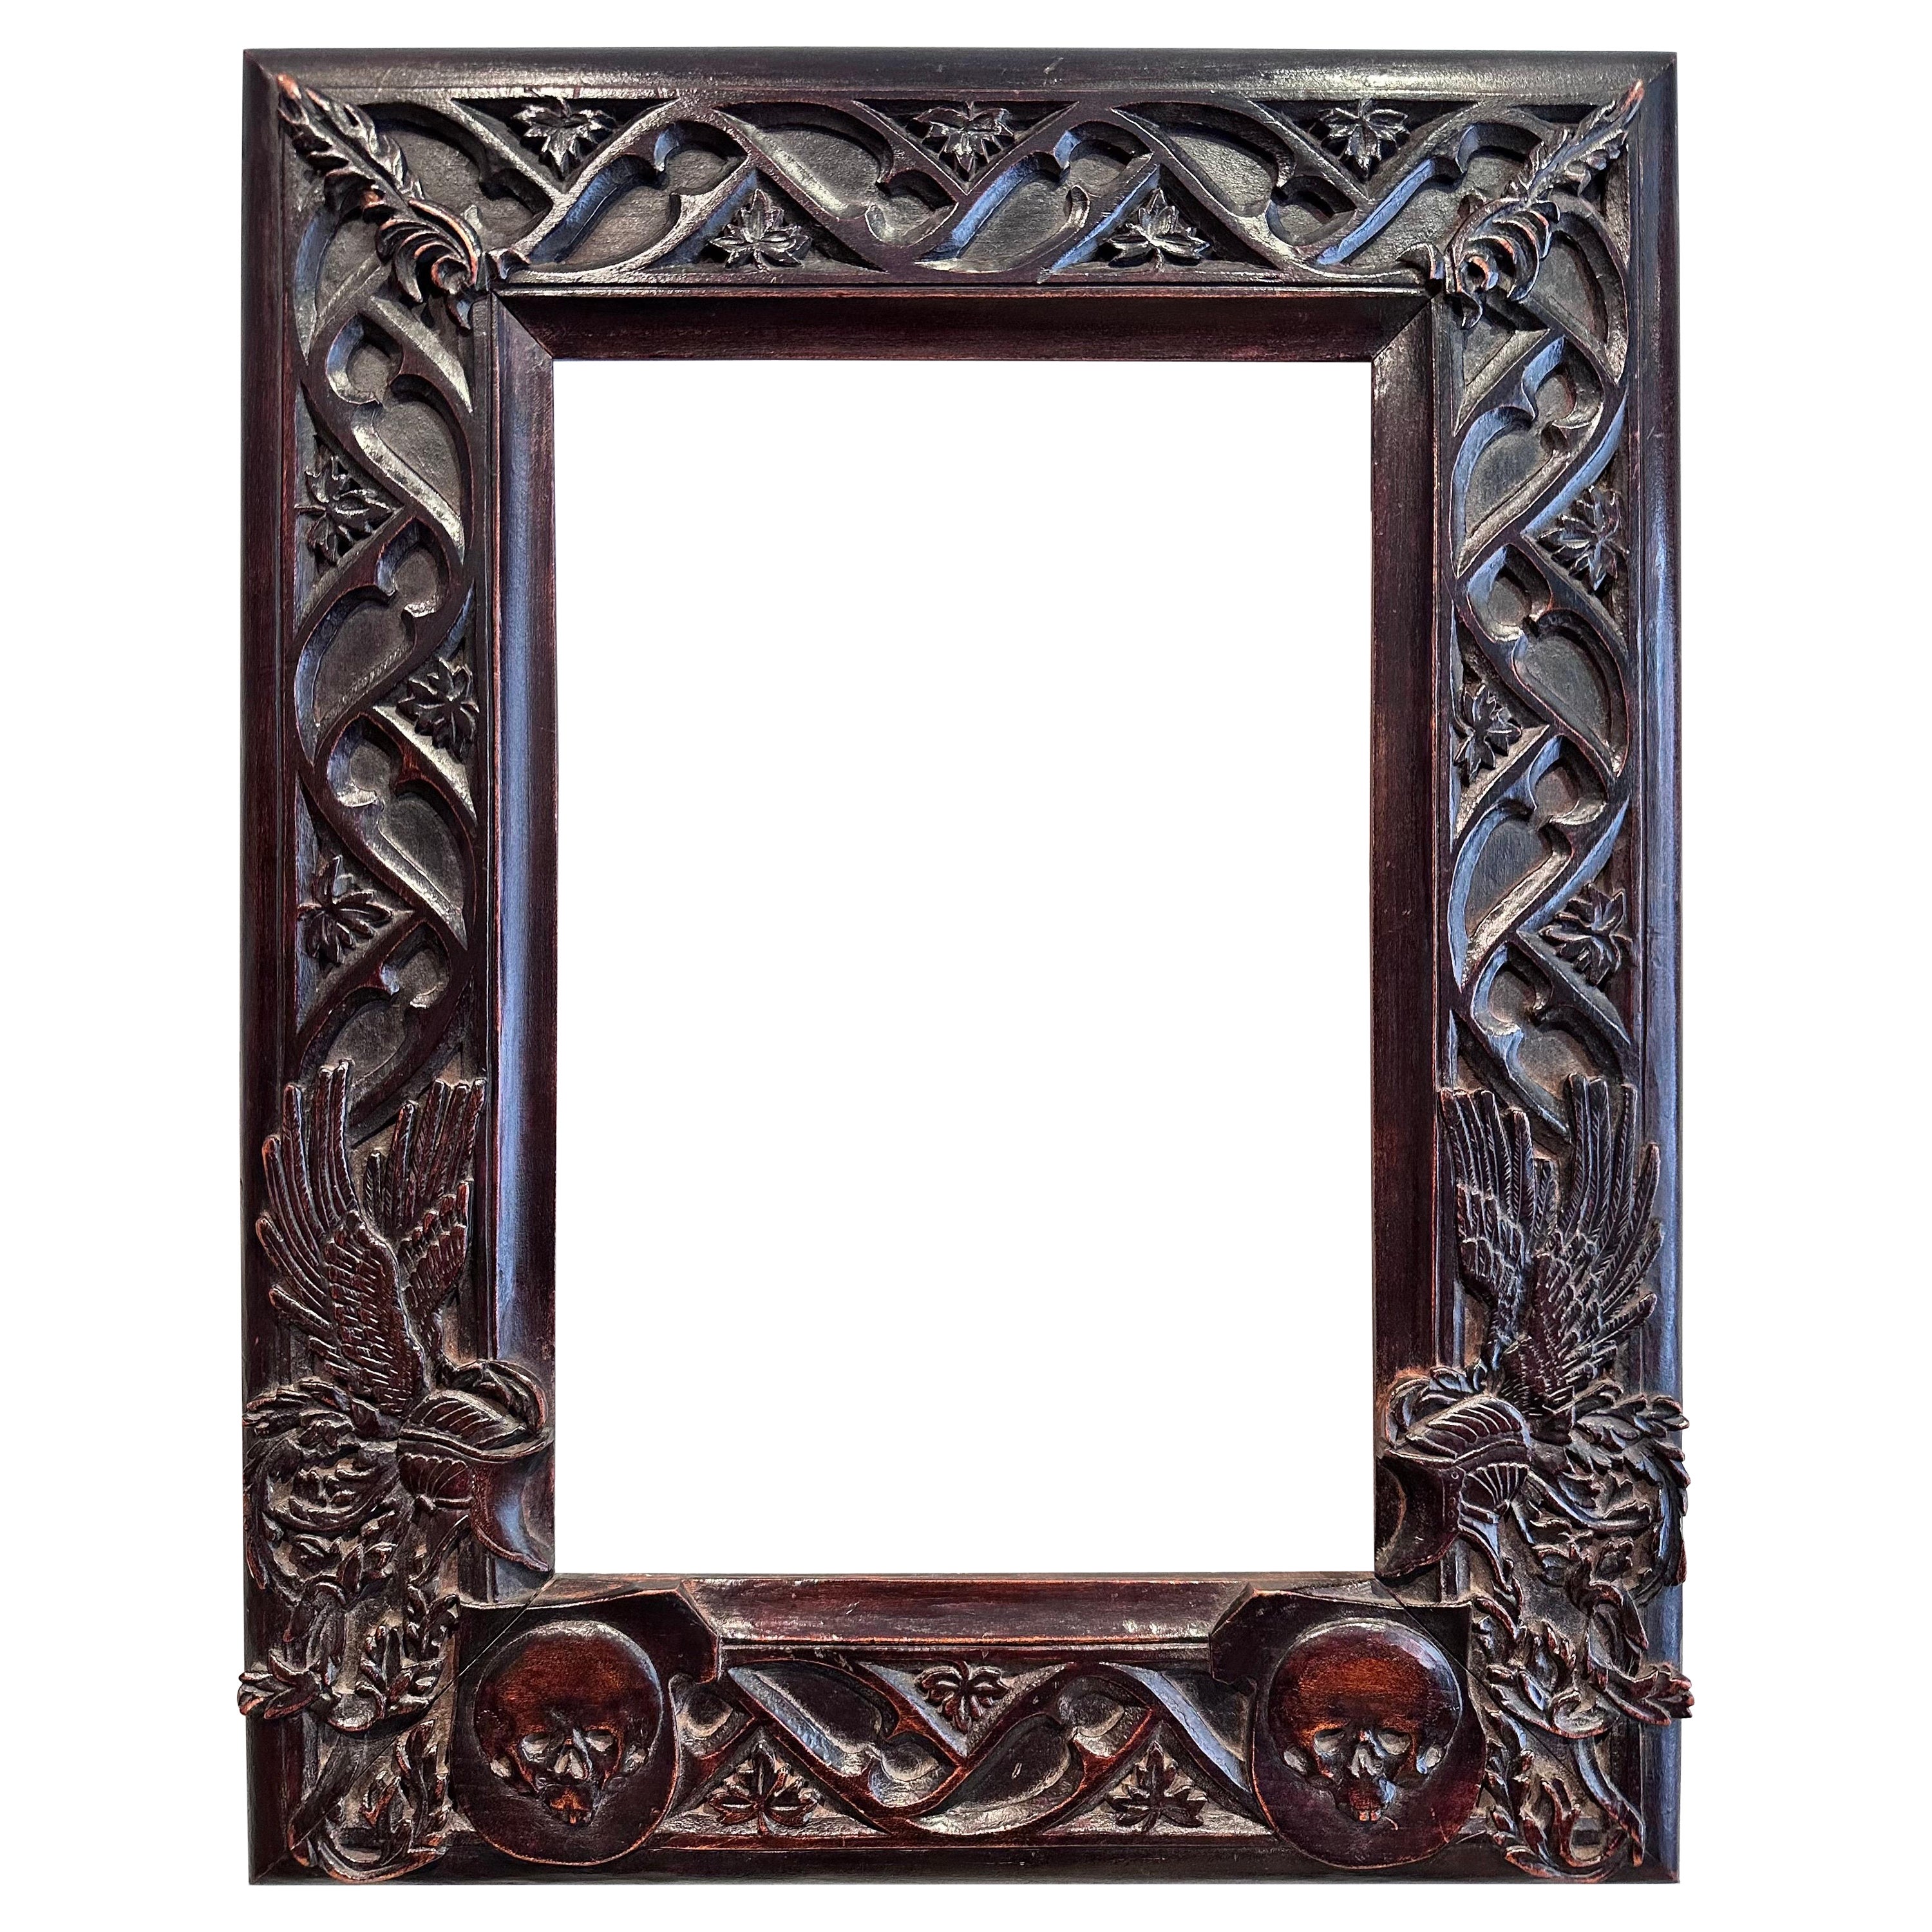 “Skull” Frame, Carved Wood 19th 1860-1880 Specially Created for Dürer Engraving 